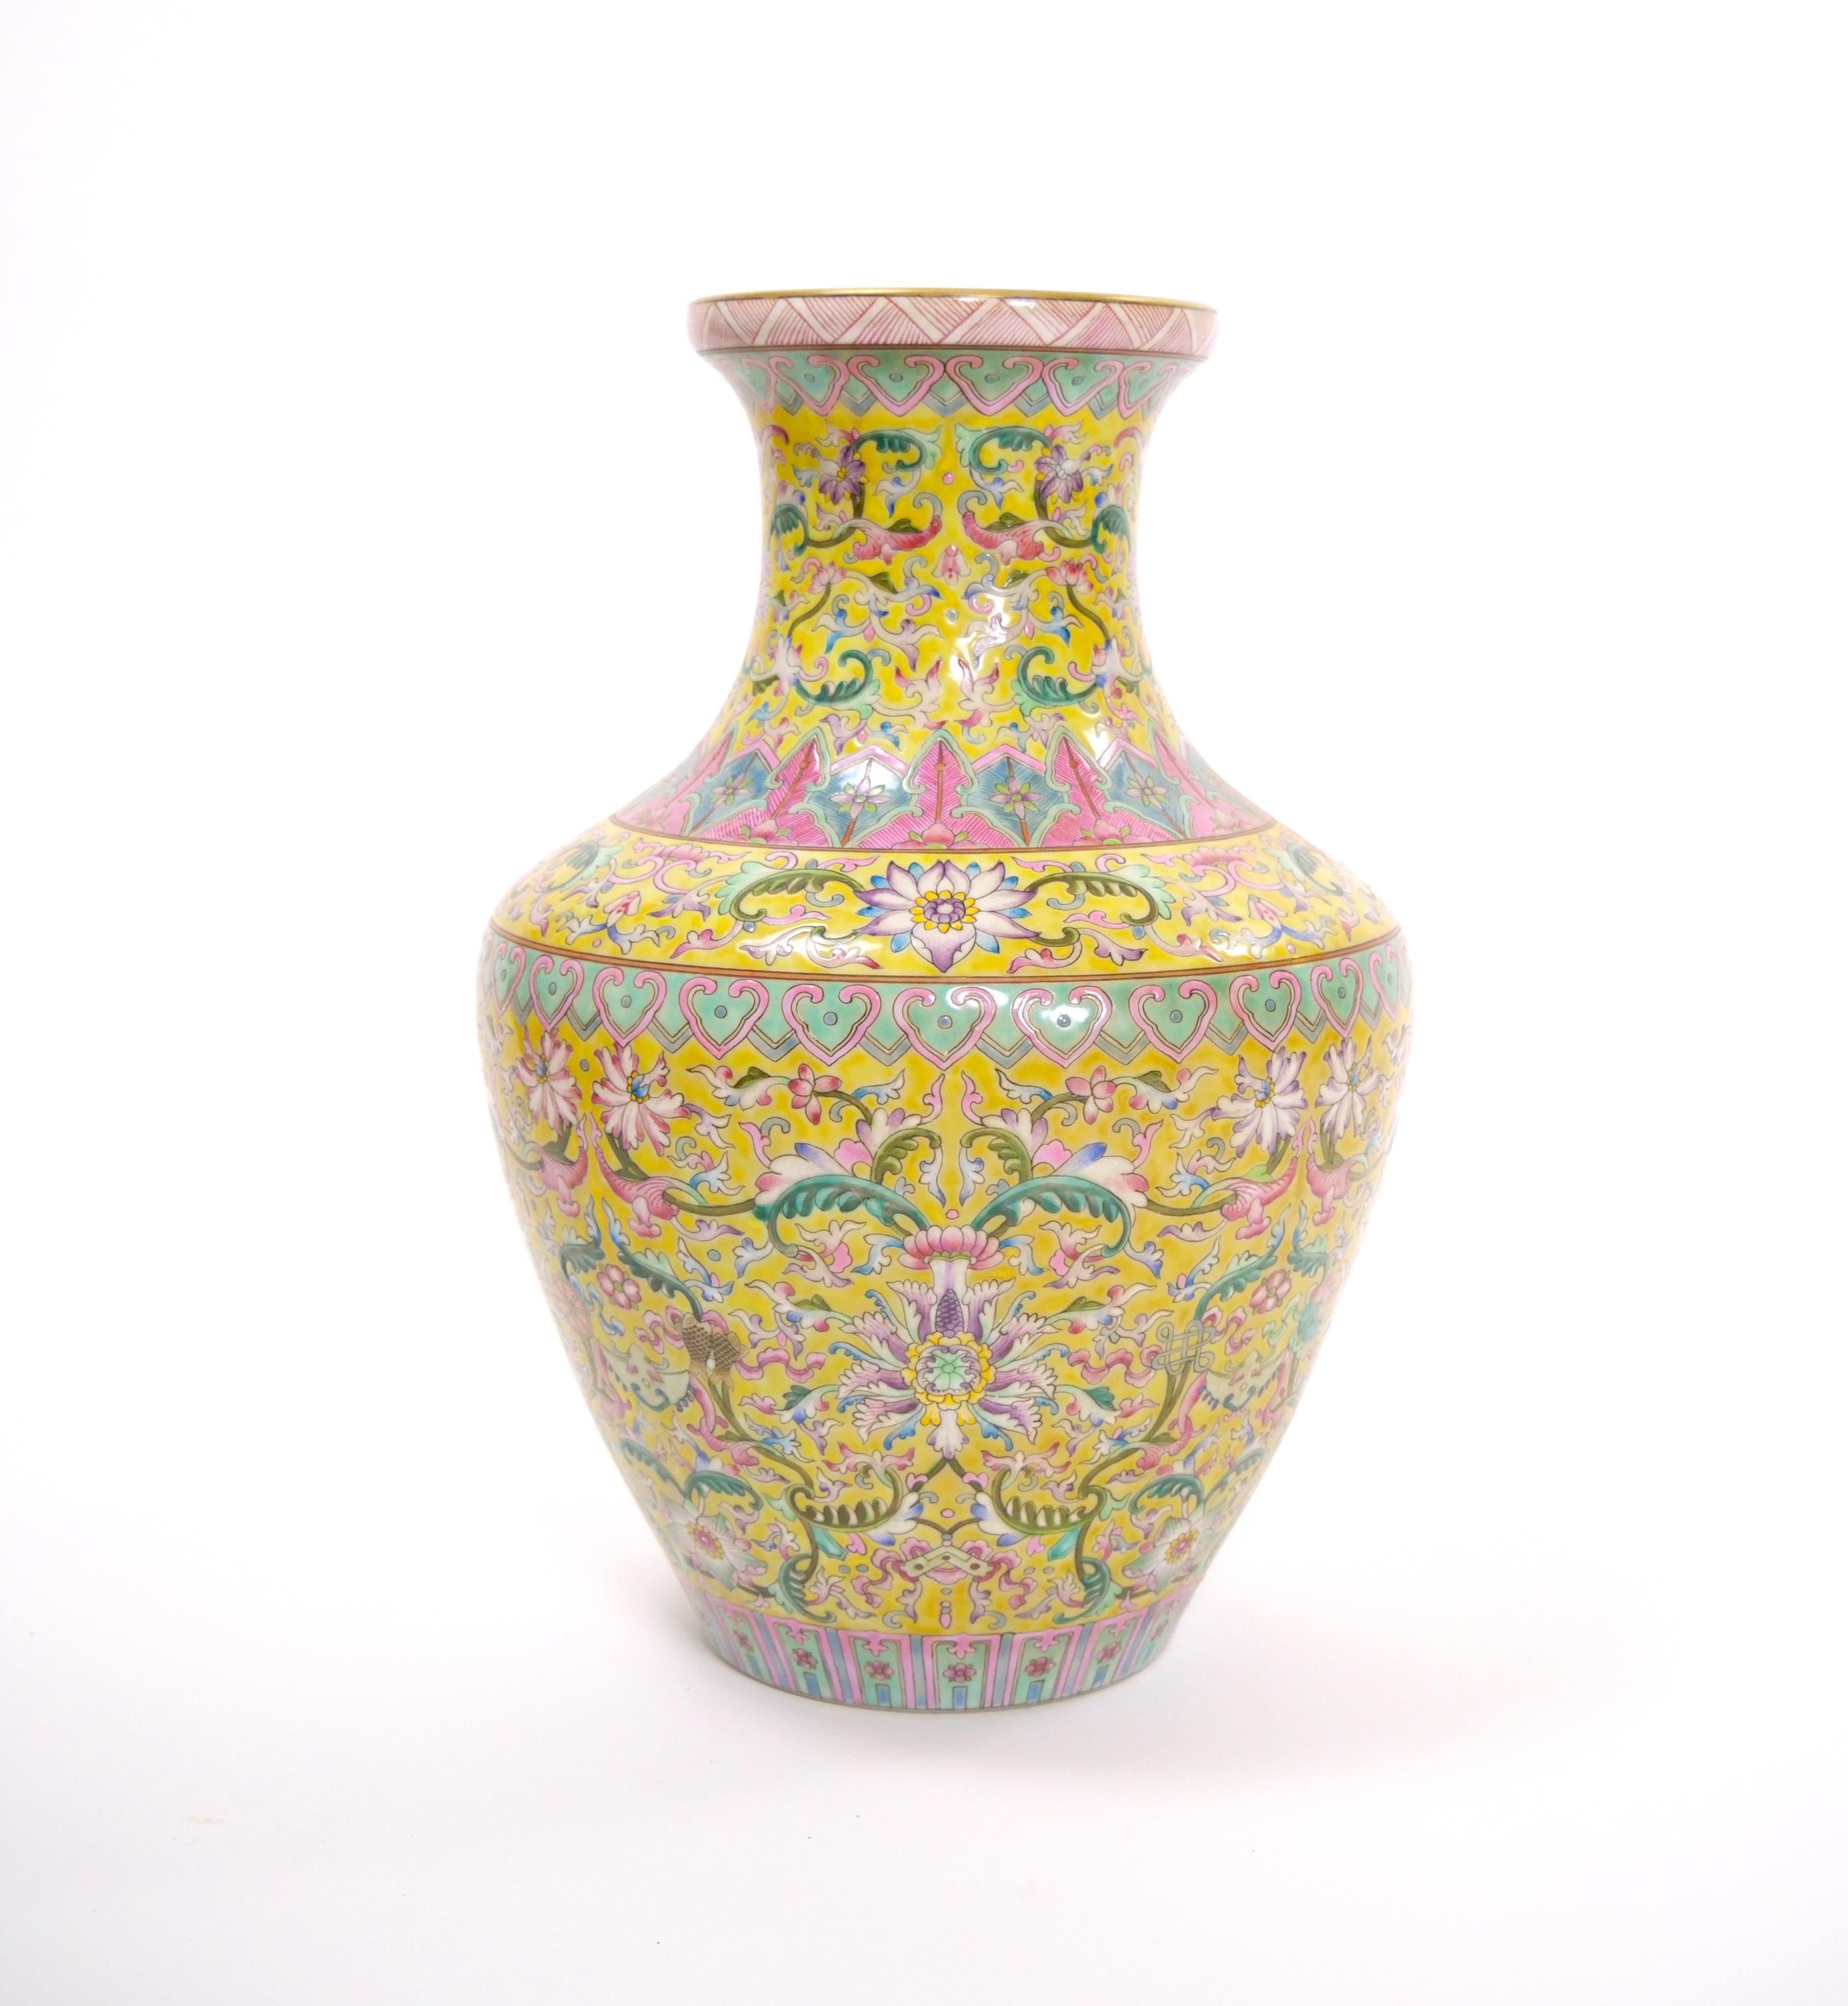 Introduce a stunning touch of Chinese elegance to your space with this Mid 20th Century Chinese Porcelain Qing Qianlong Famille Jaune Decorative Vase. This exquisite vase features a classic bottle shape, meticulously crafted with heavily detailed